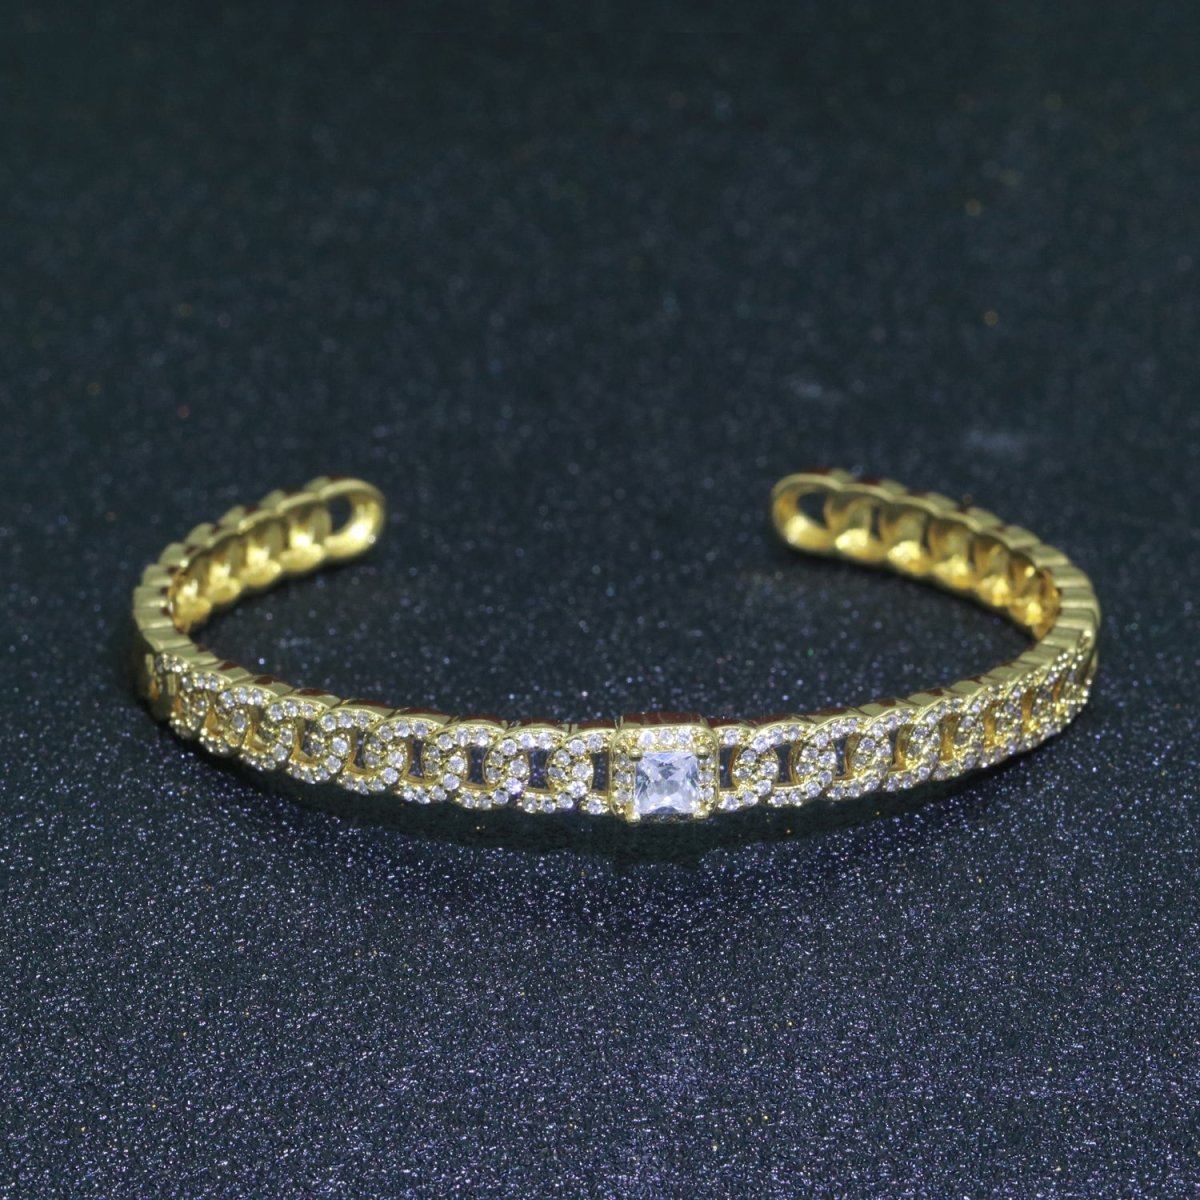 24K Gold Filled Cuban Curb Chain Bracelet With CZ Stones Wholesale Open Adjustable Bangle Fashion Jewelry | WA-072 Clearance Pricing - DLUXCA